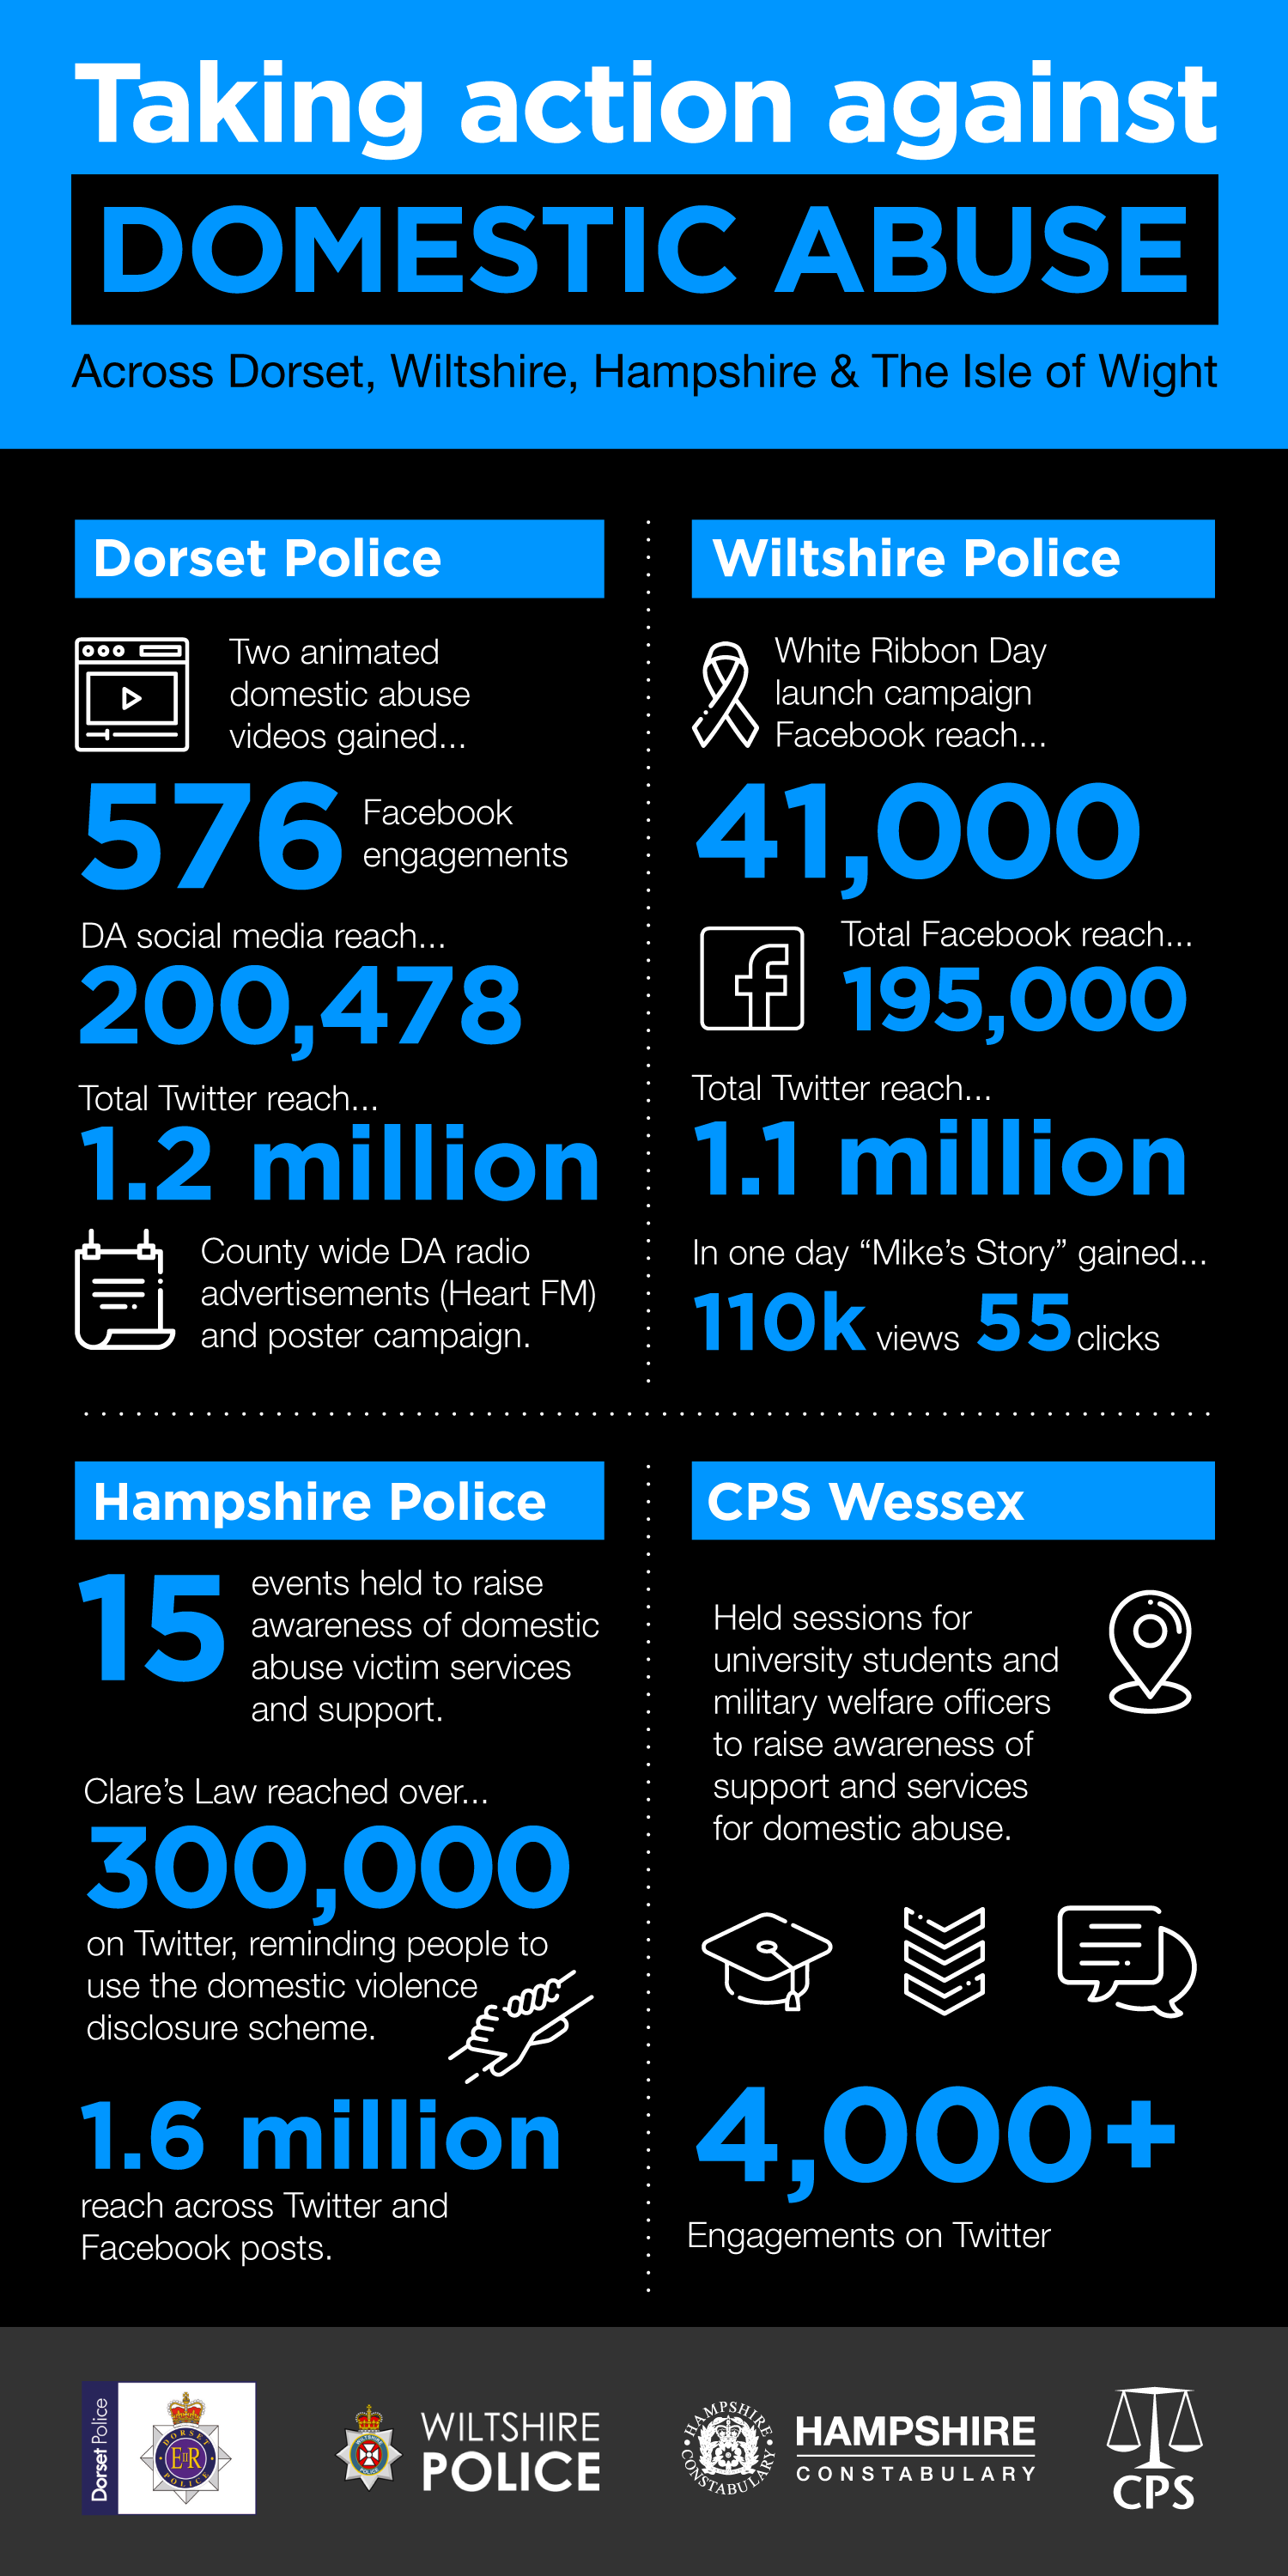 Infographic: Taking action against domestic abuse across Dorset, Wiltshire, Hampshire & The Isle of Wight